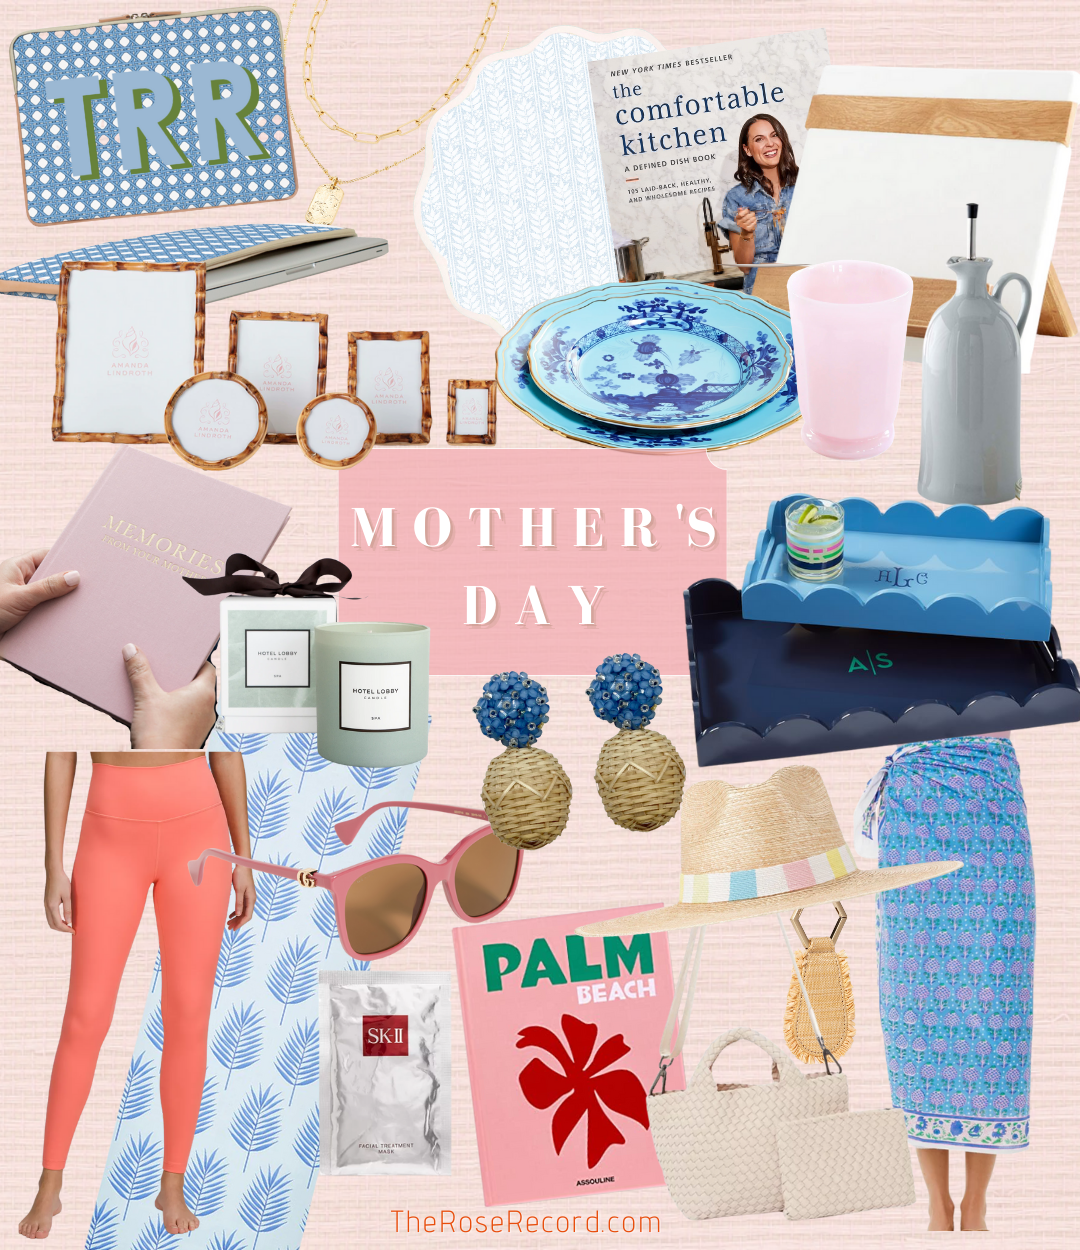 Mother's Day recipes - personalised book